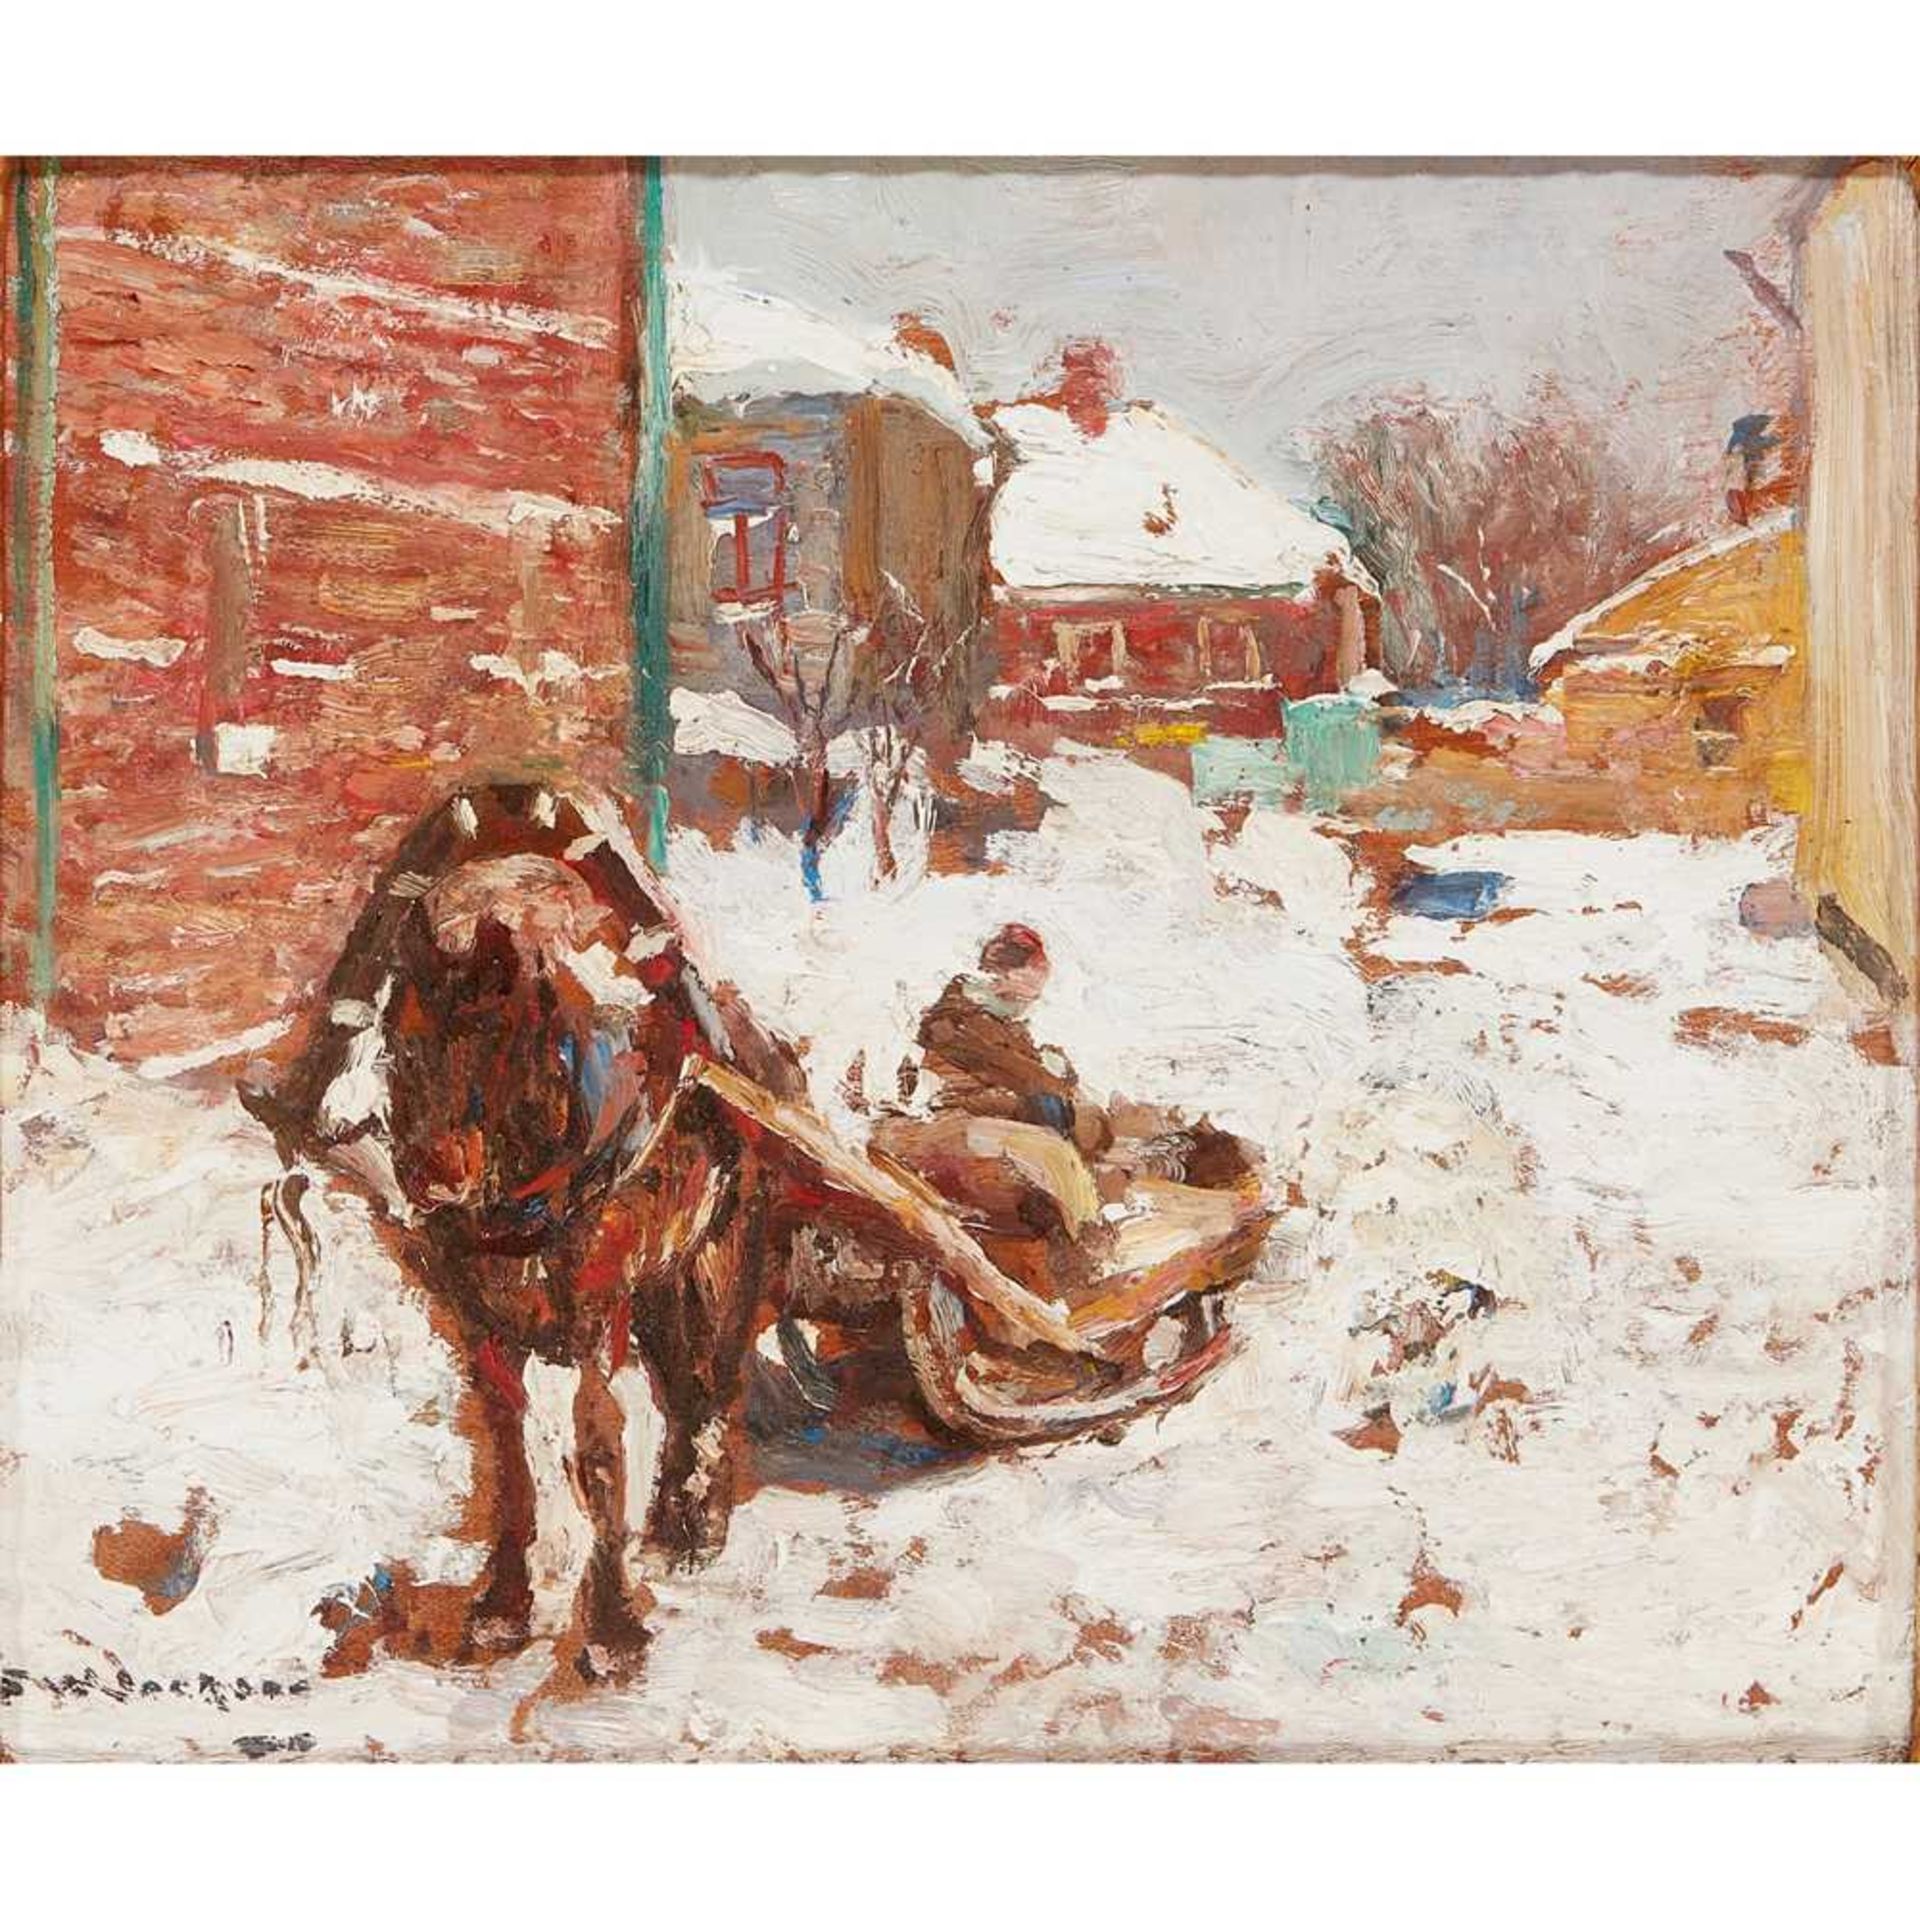 FREDERICK WILLIAM JACKSON R.B.A (BRITISH 1859-1918) HORSE DRAWN SLED IN THE SNOW RUSSIA